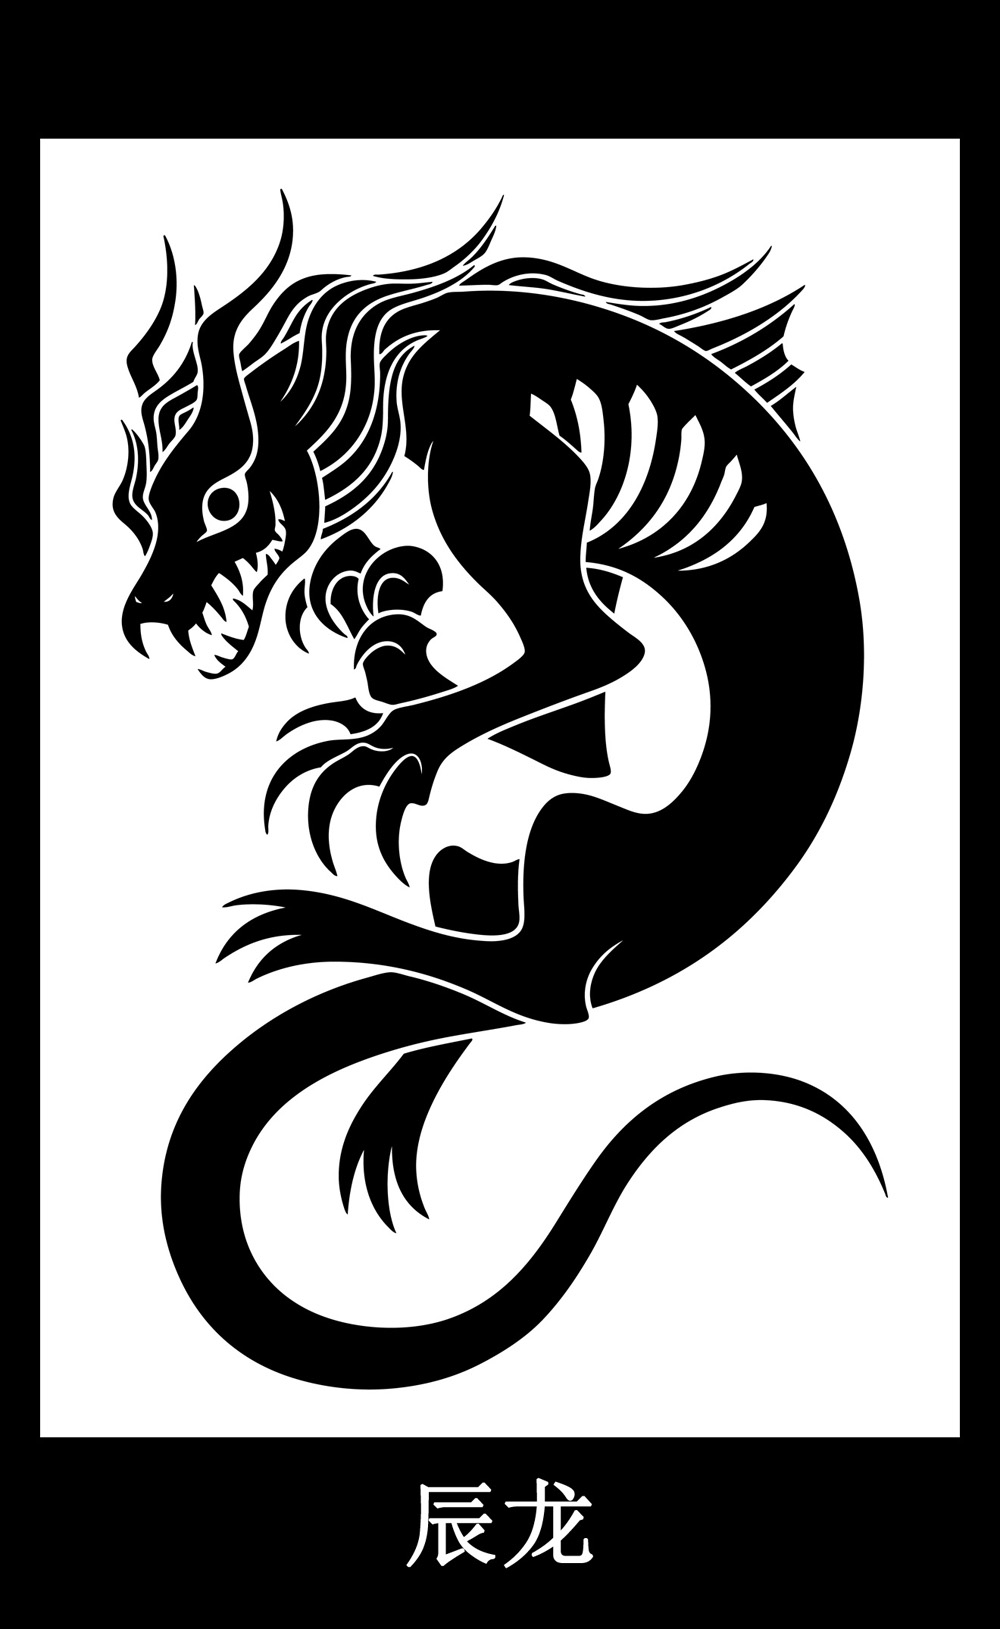 05 - Dragon - SCP-682 - Hard-to-Destroy Reptile